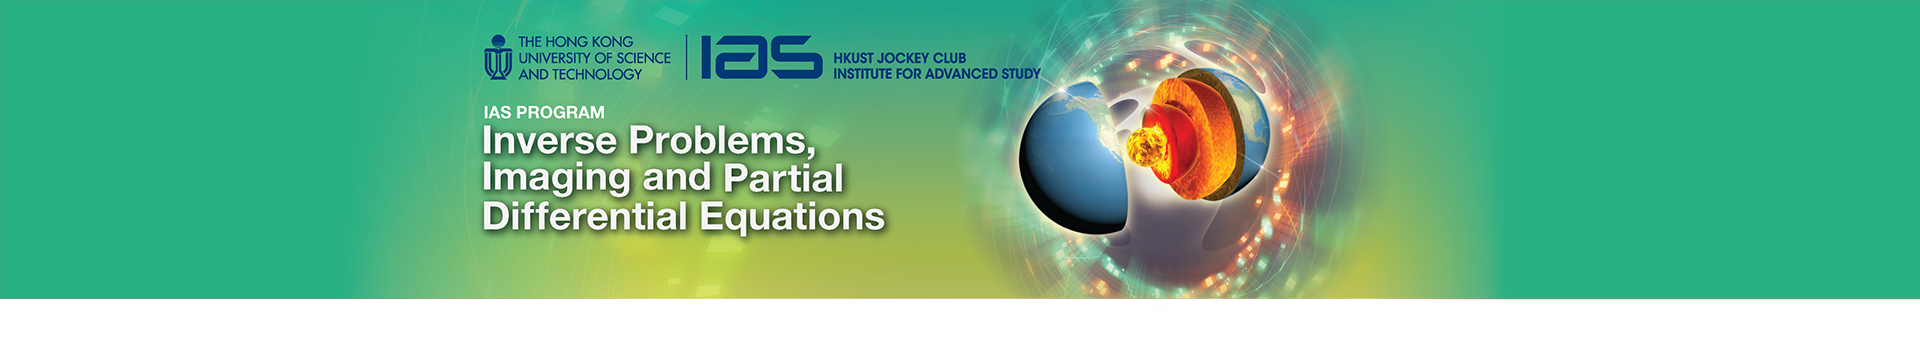 IAS Program on Inverse Problems, Imaging and Partial Differential Equations